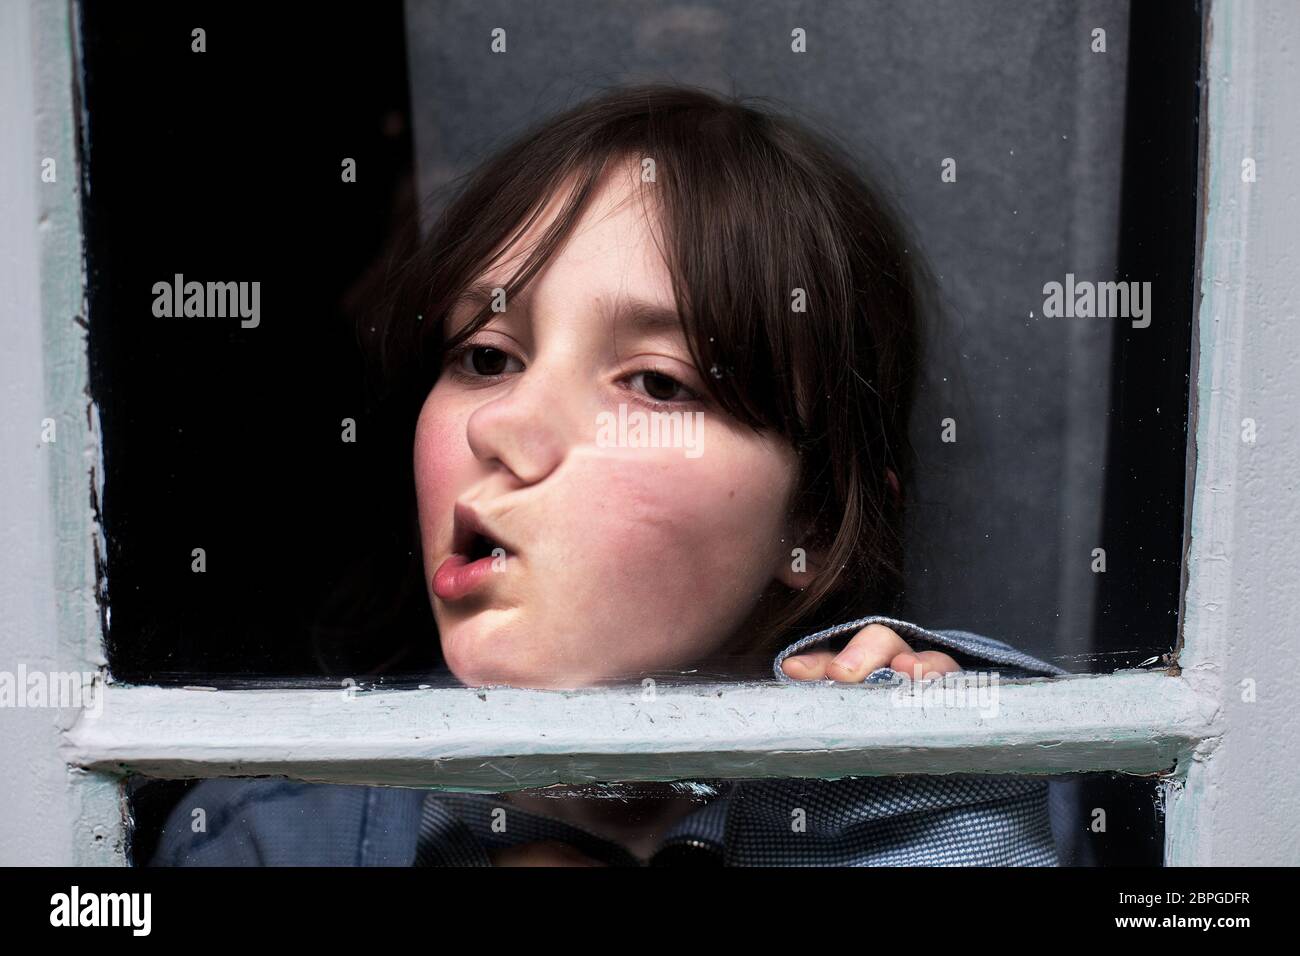 11 year-old boy making against the window pane during lockdown. Stock Photo